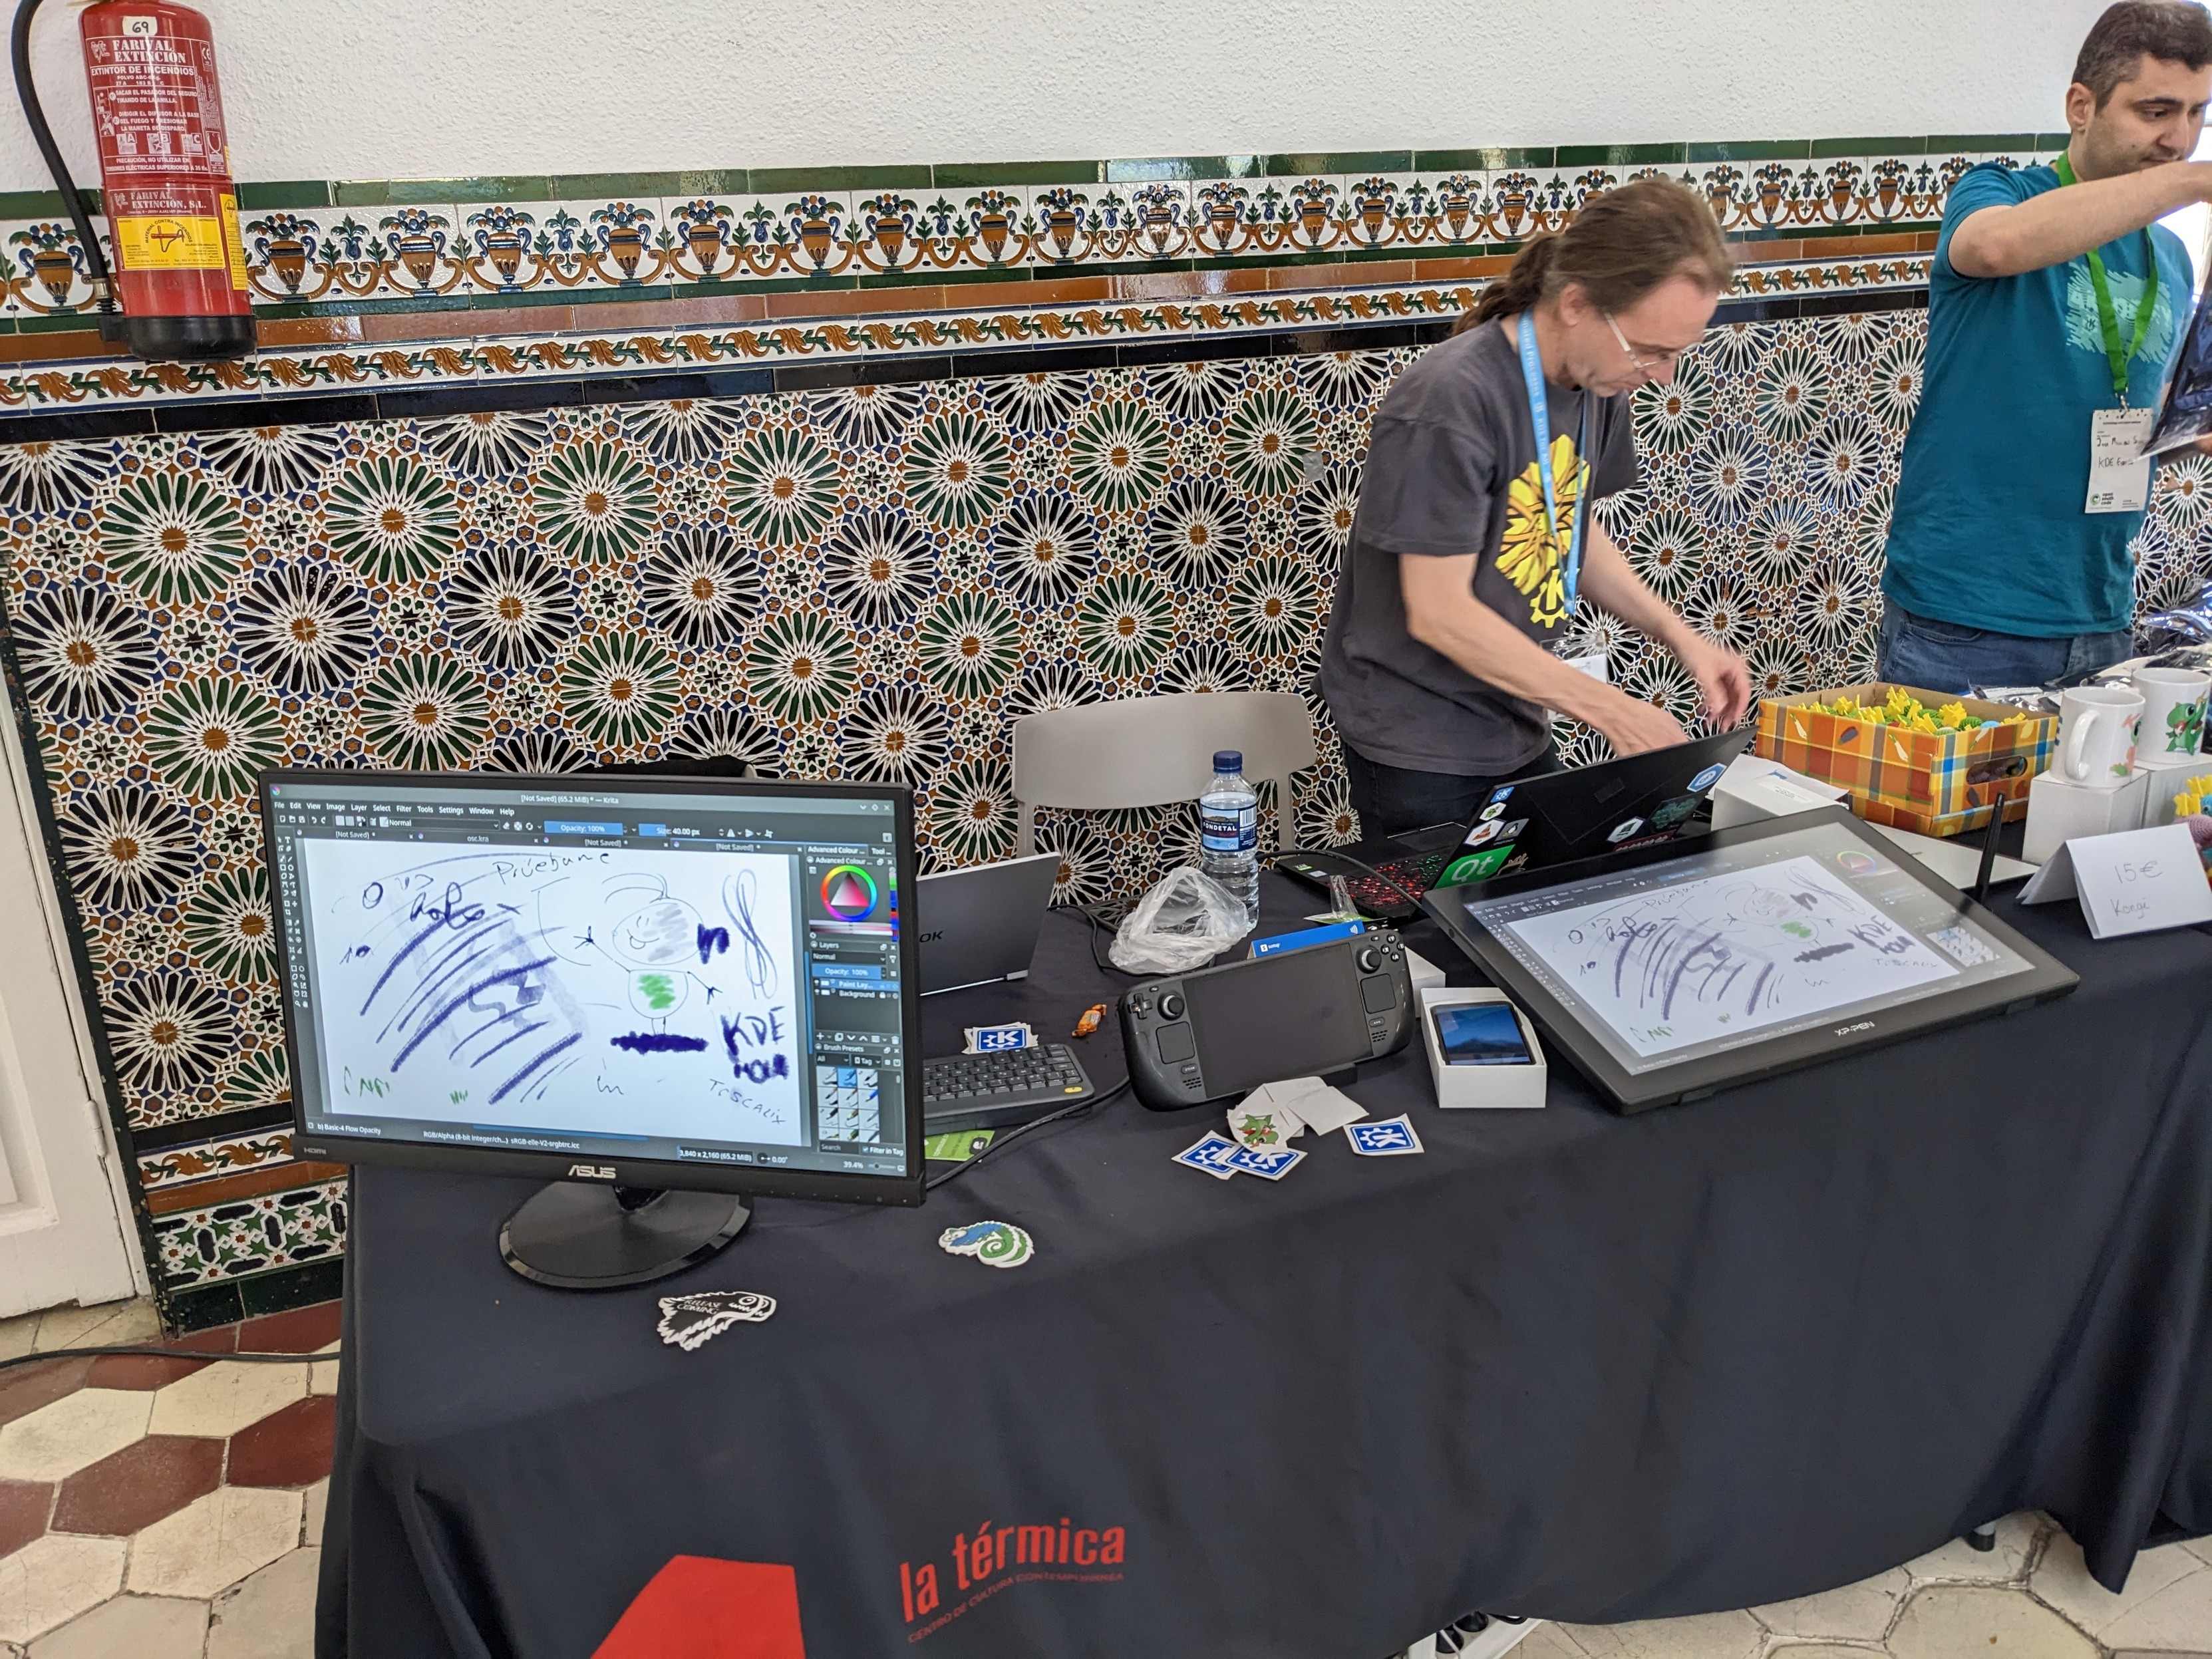 This photo shows the KDE booth at OpenSouthCode 2023. On the table there from left to right a monitor showing pictures drawn with Krita, A Steam Deck, a Pinephone, and a drawing tablet. An assortment of stickers lay scattered around the devices.